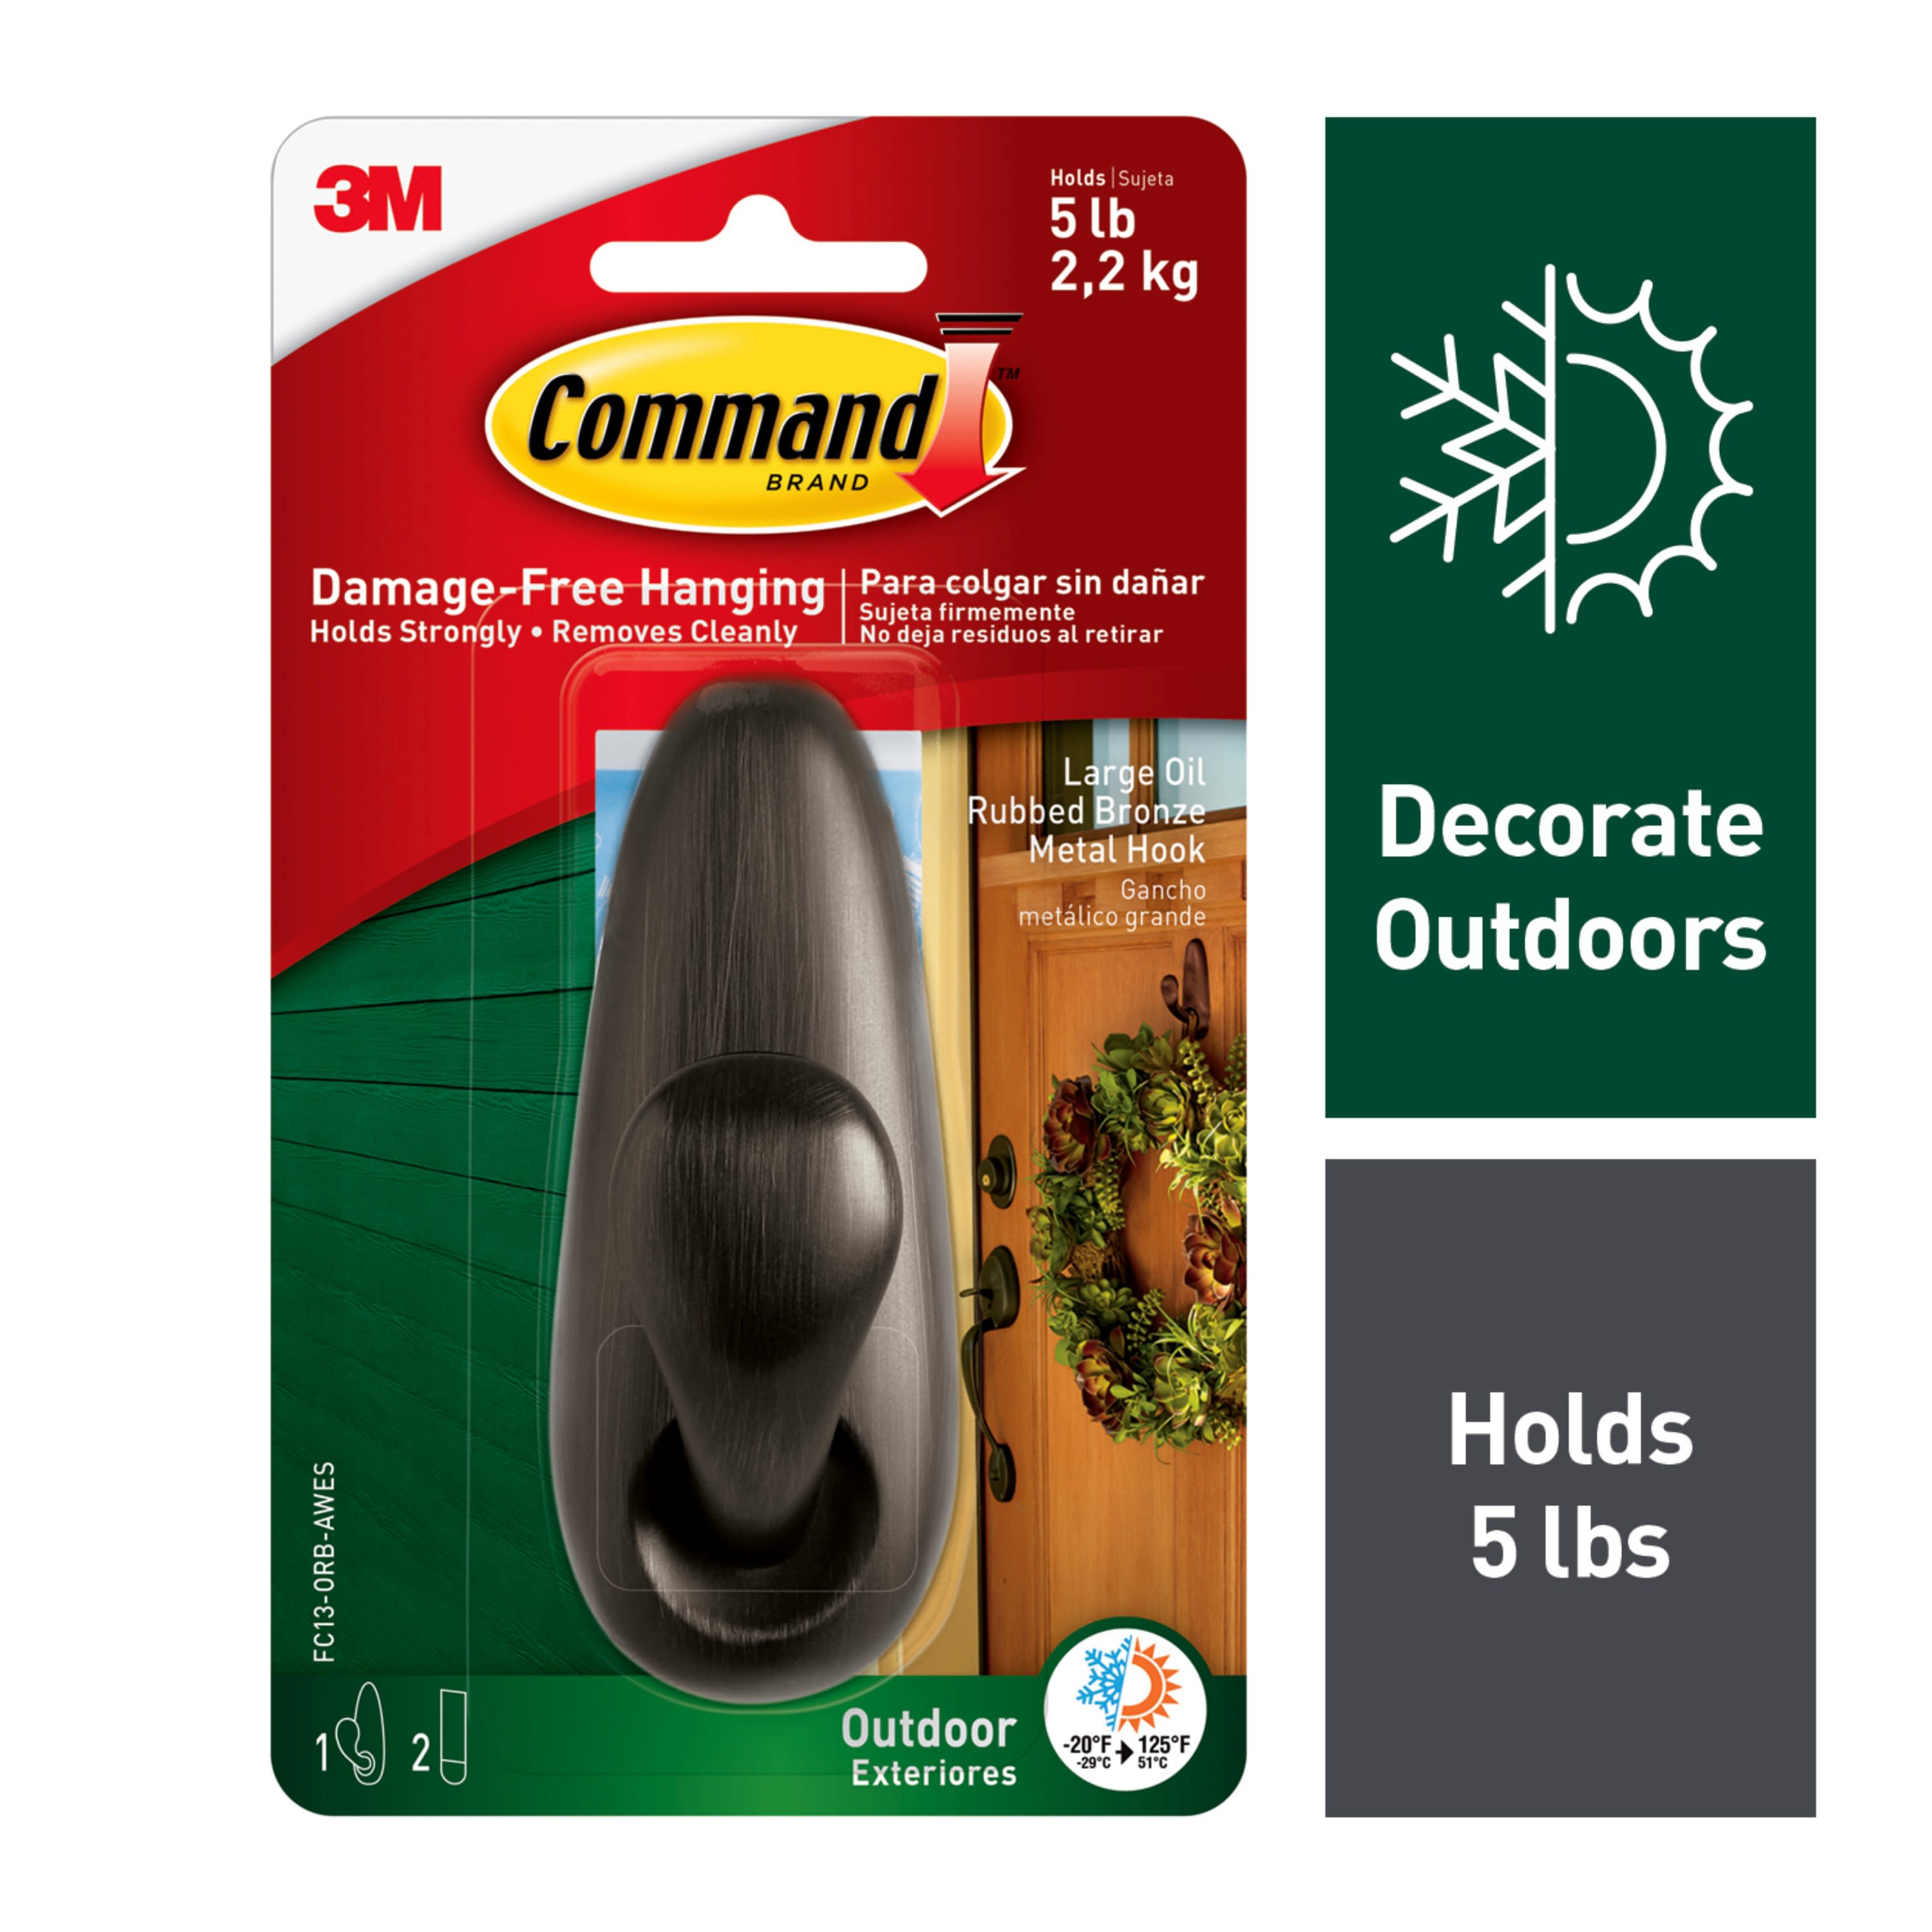 Command Large Outdoor Metal Multipurpose Hook in the Christmas